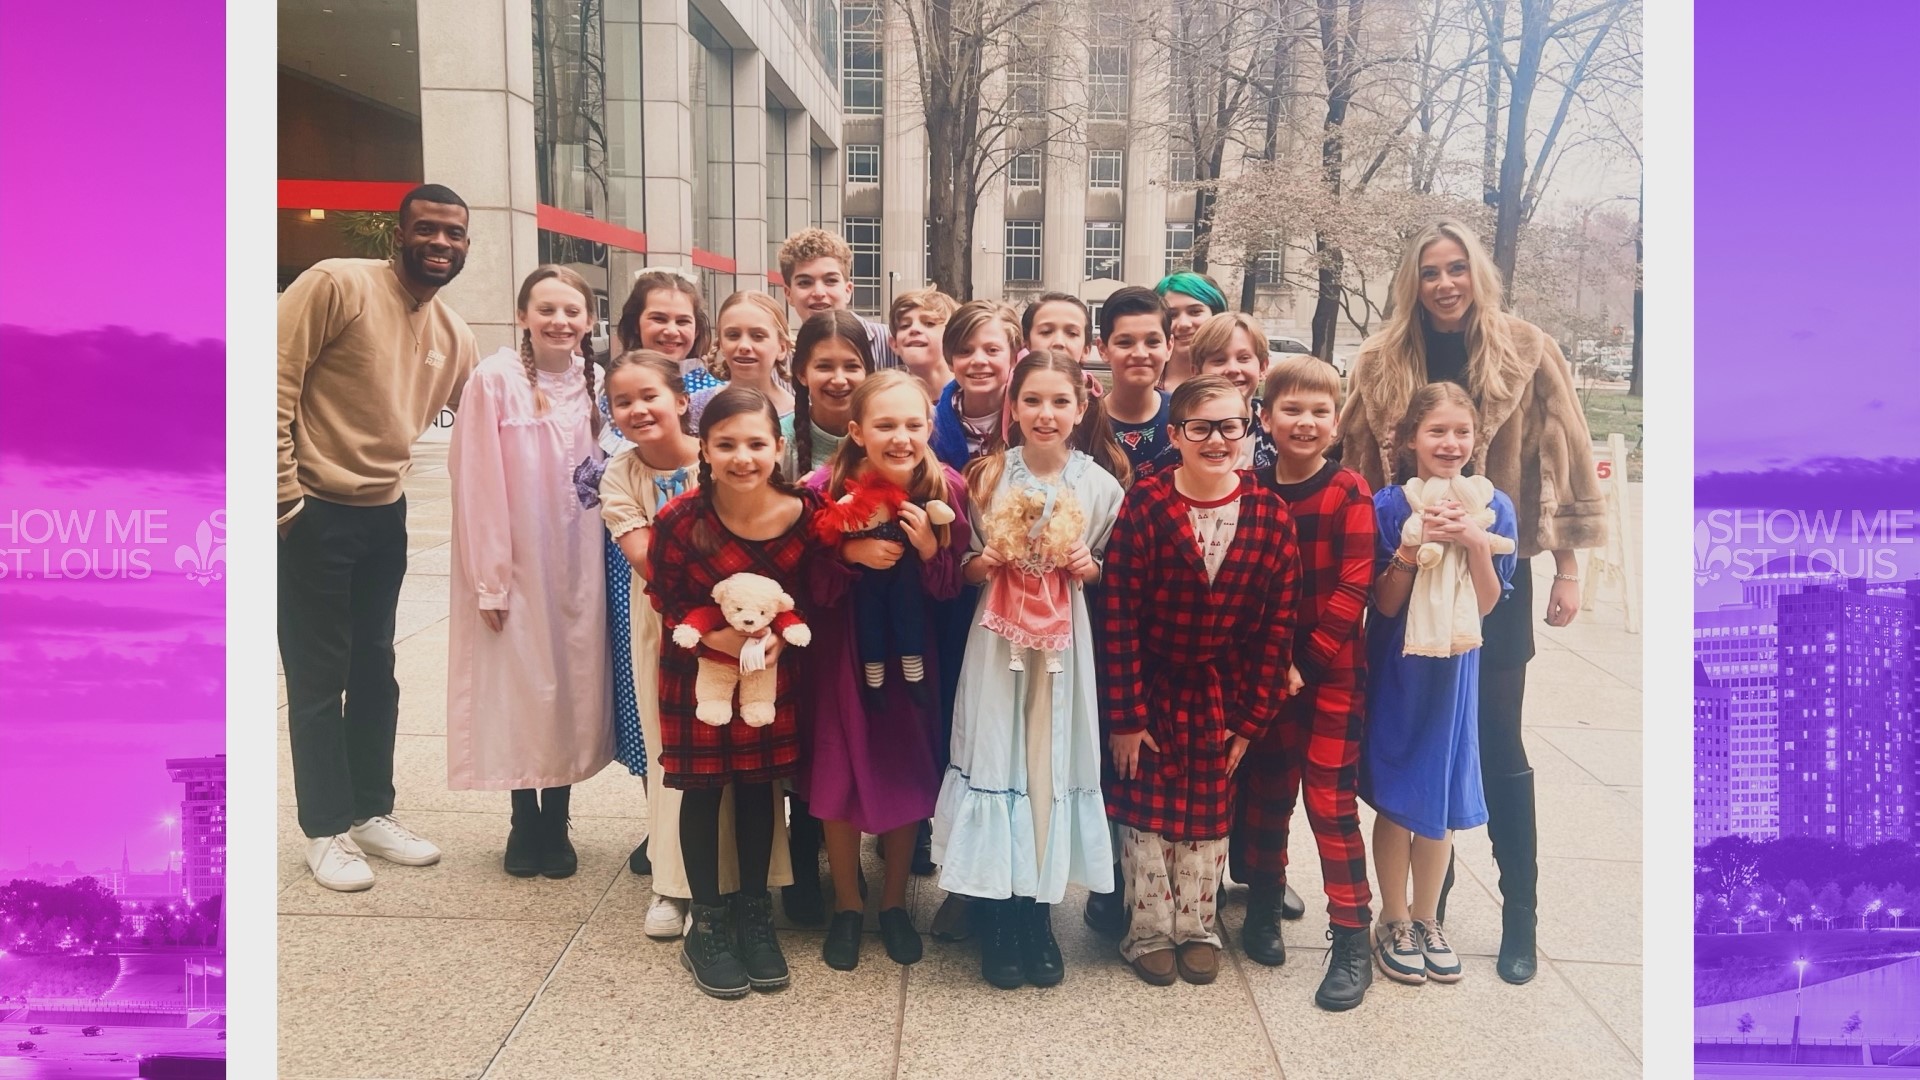 Buddy the Elf once said, 'the best way to spread Christmas cheer is singing for all to hear!' Gateway Center for Performing Arts did just that.